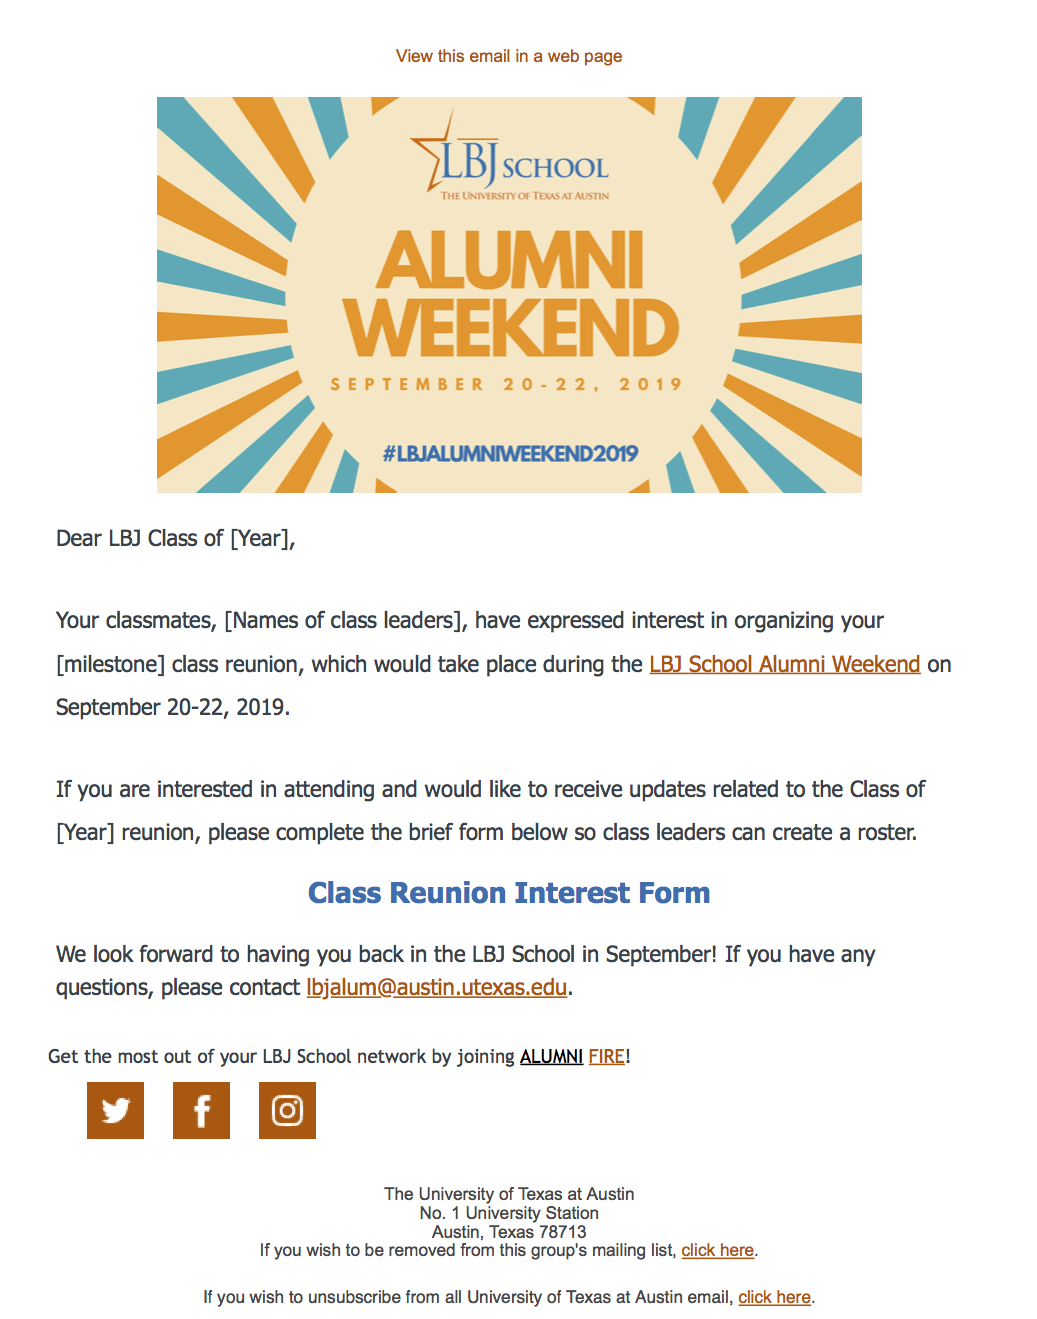 LBJ Class of [Year] Reunion Interest Form Email